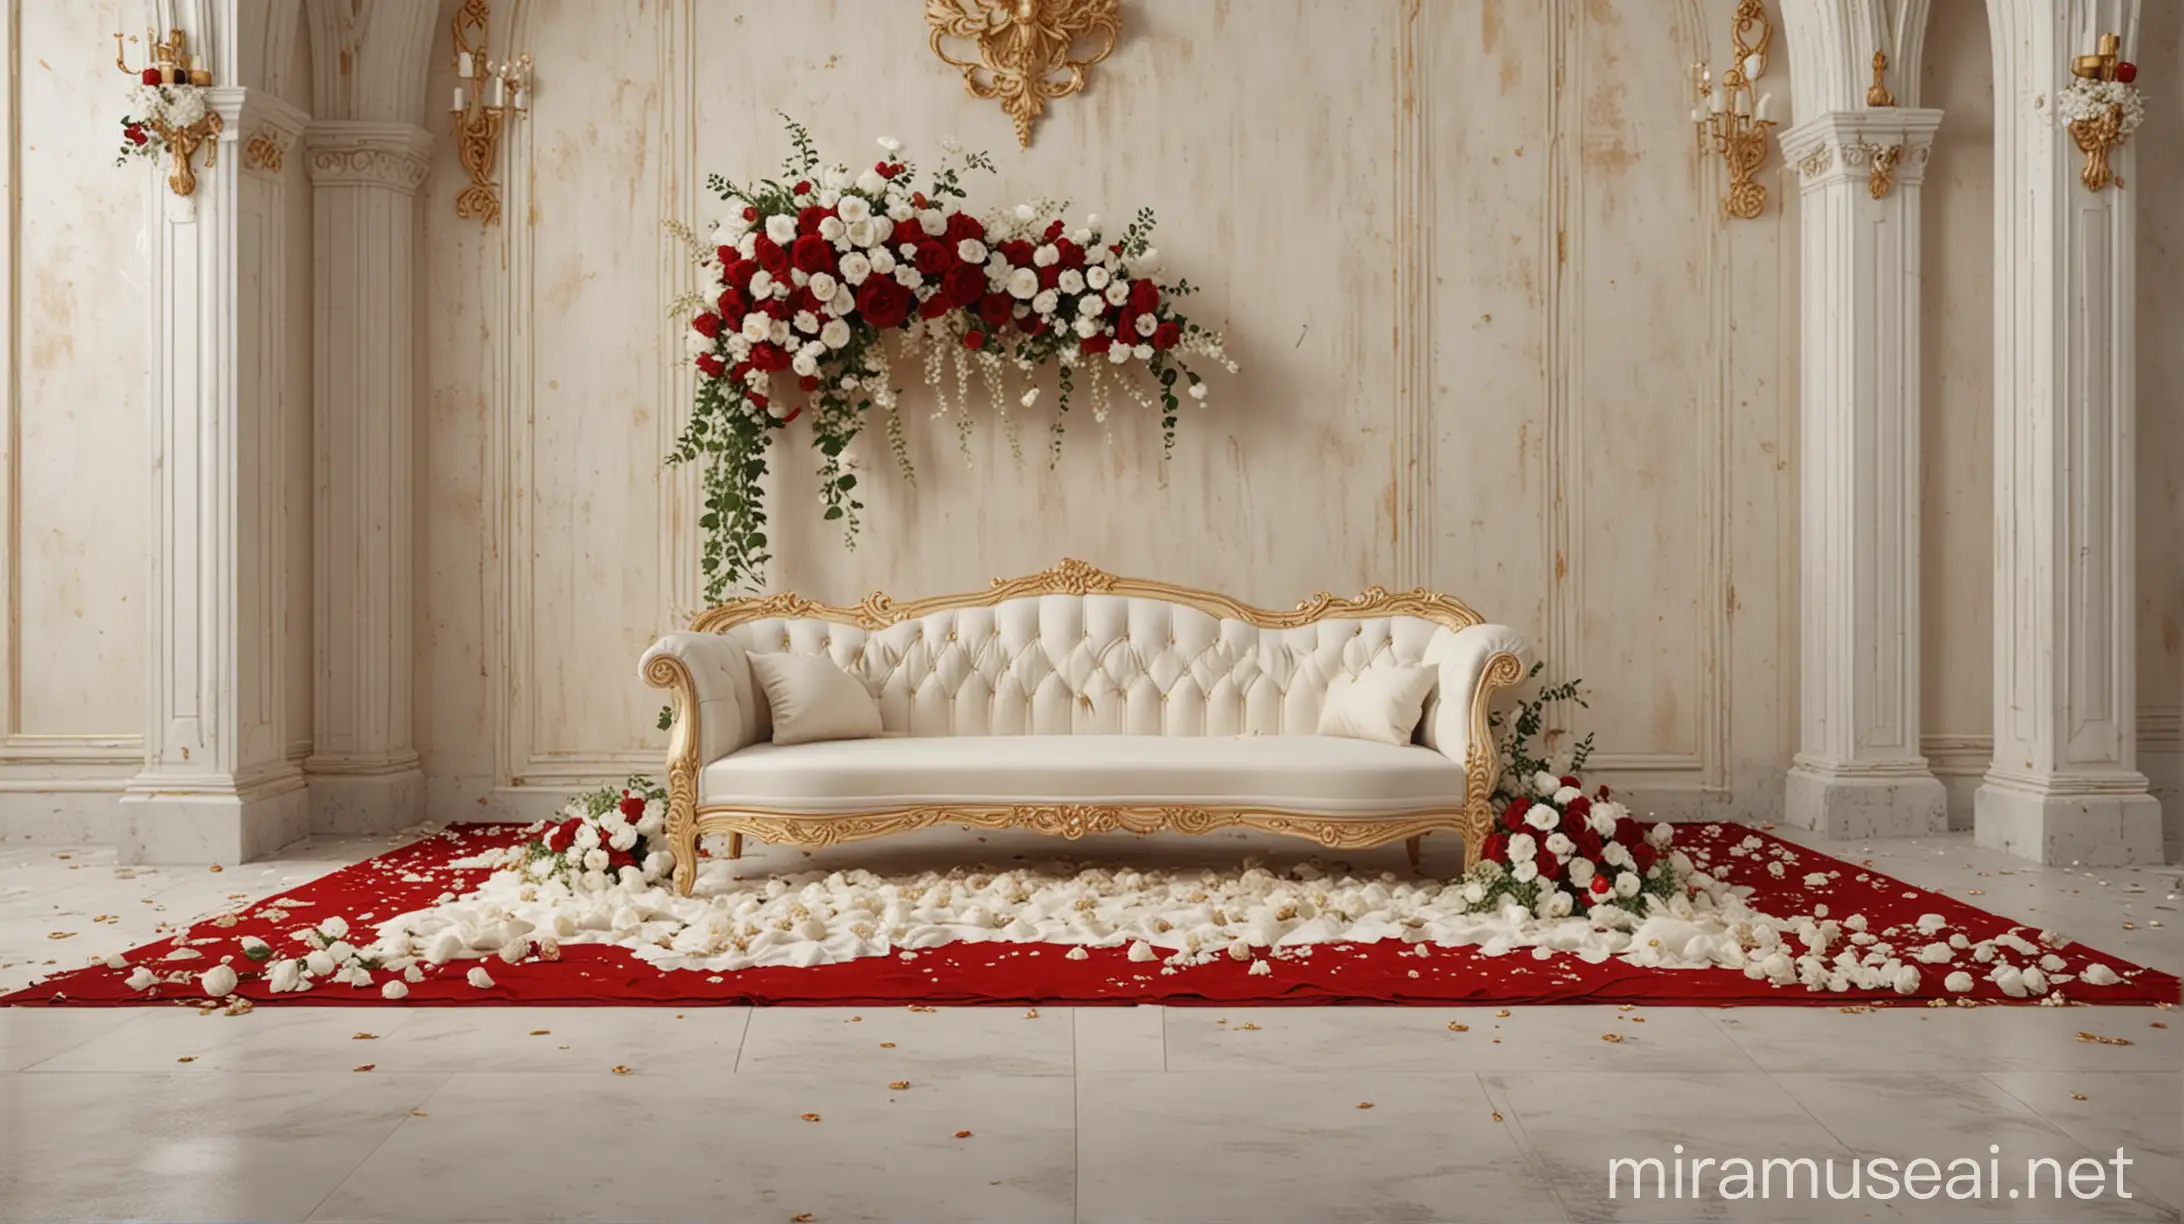 wedding gothic wall theme cream white red floor and gold accessory  whie flower,luxury style realistic 4k